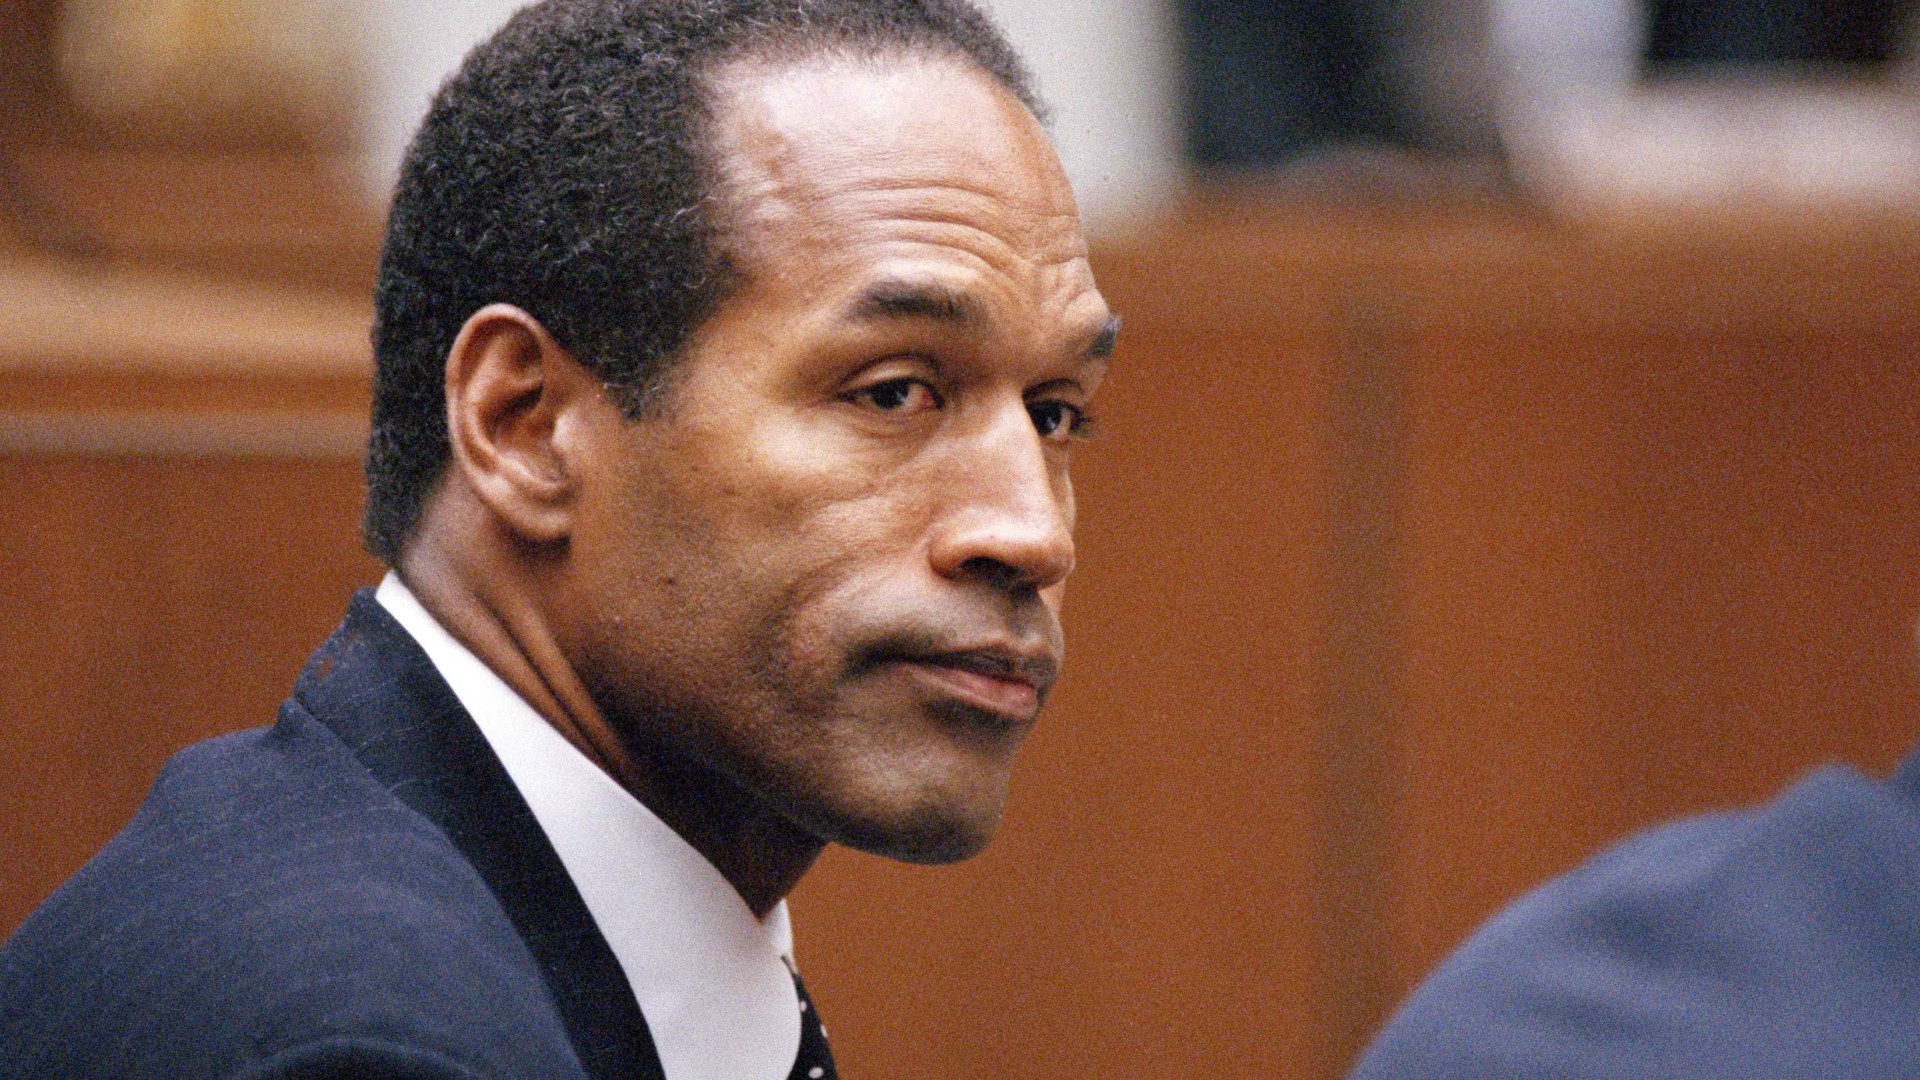 Shamed OJ Simpson quietly cremated in Las Vegas after ex-NFL star died ‘content’ from cancer aged 76, lawyer reveals [Video]